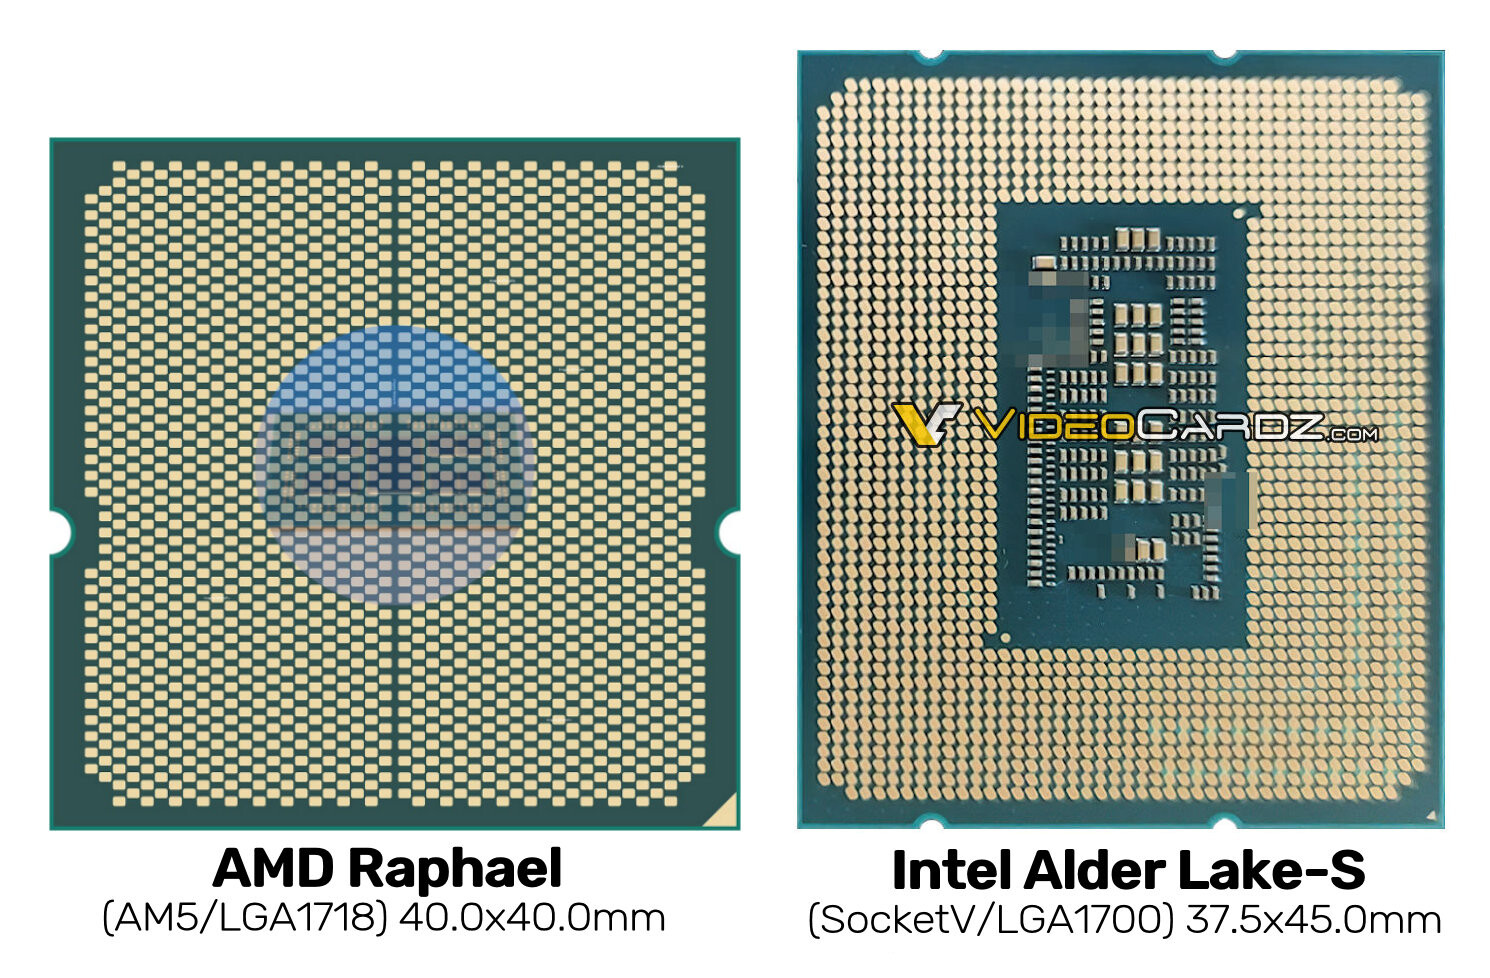 AM4 vs AM5 - Learn the difference between AMD's latest sockets